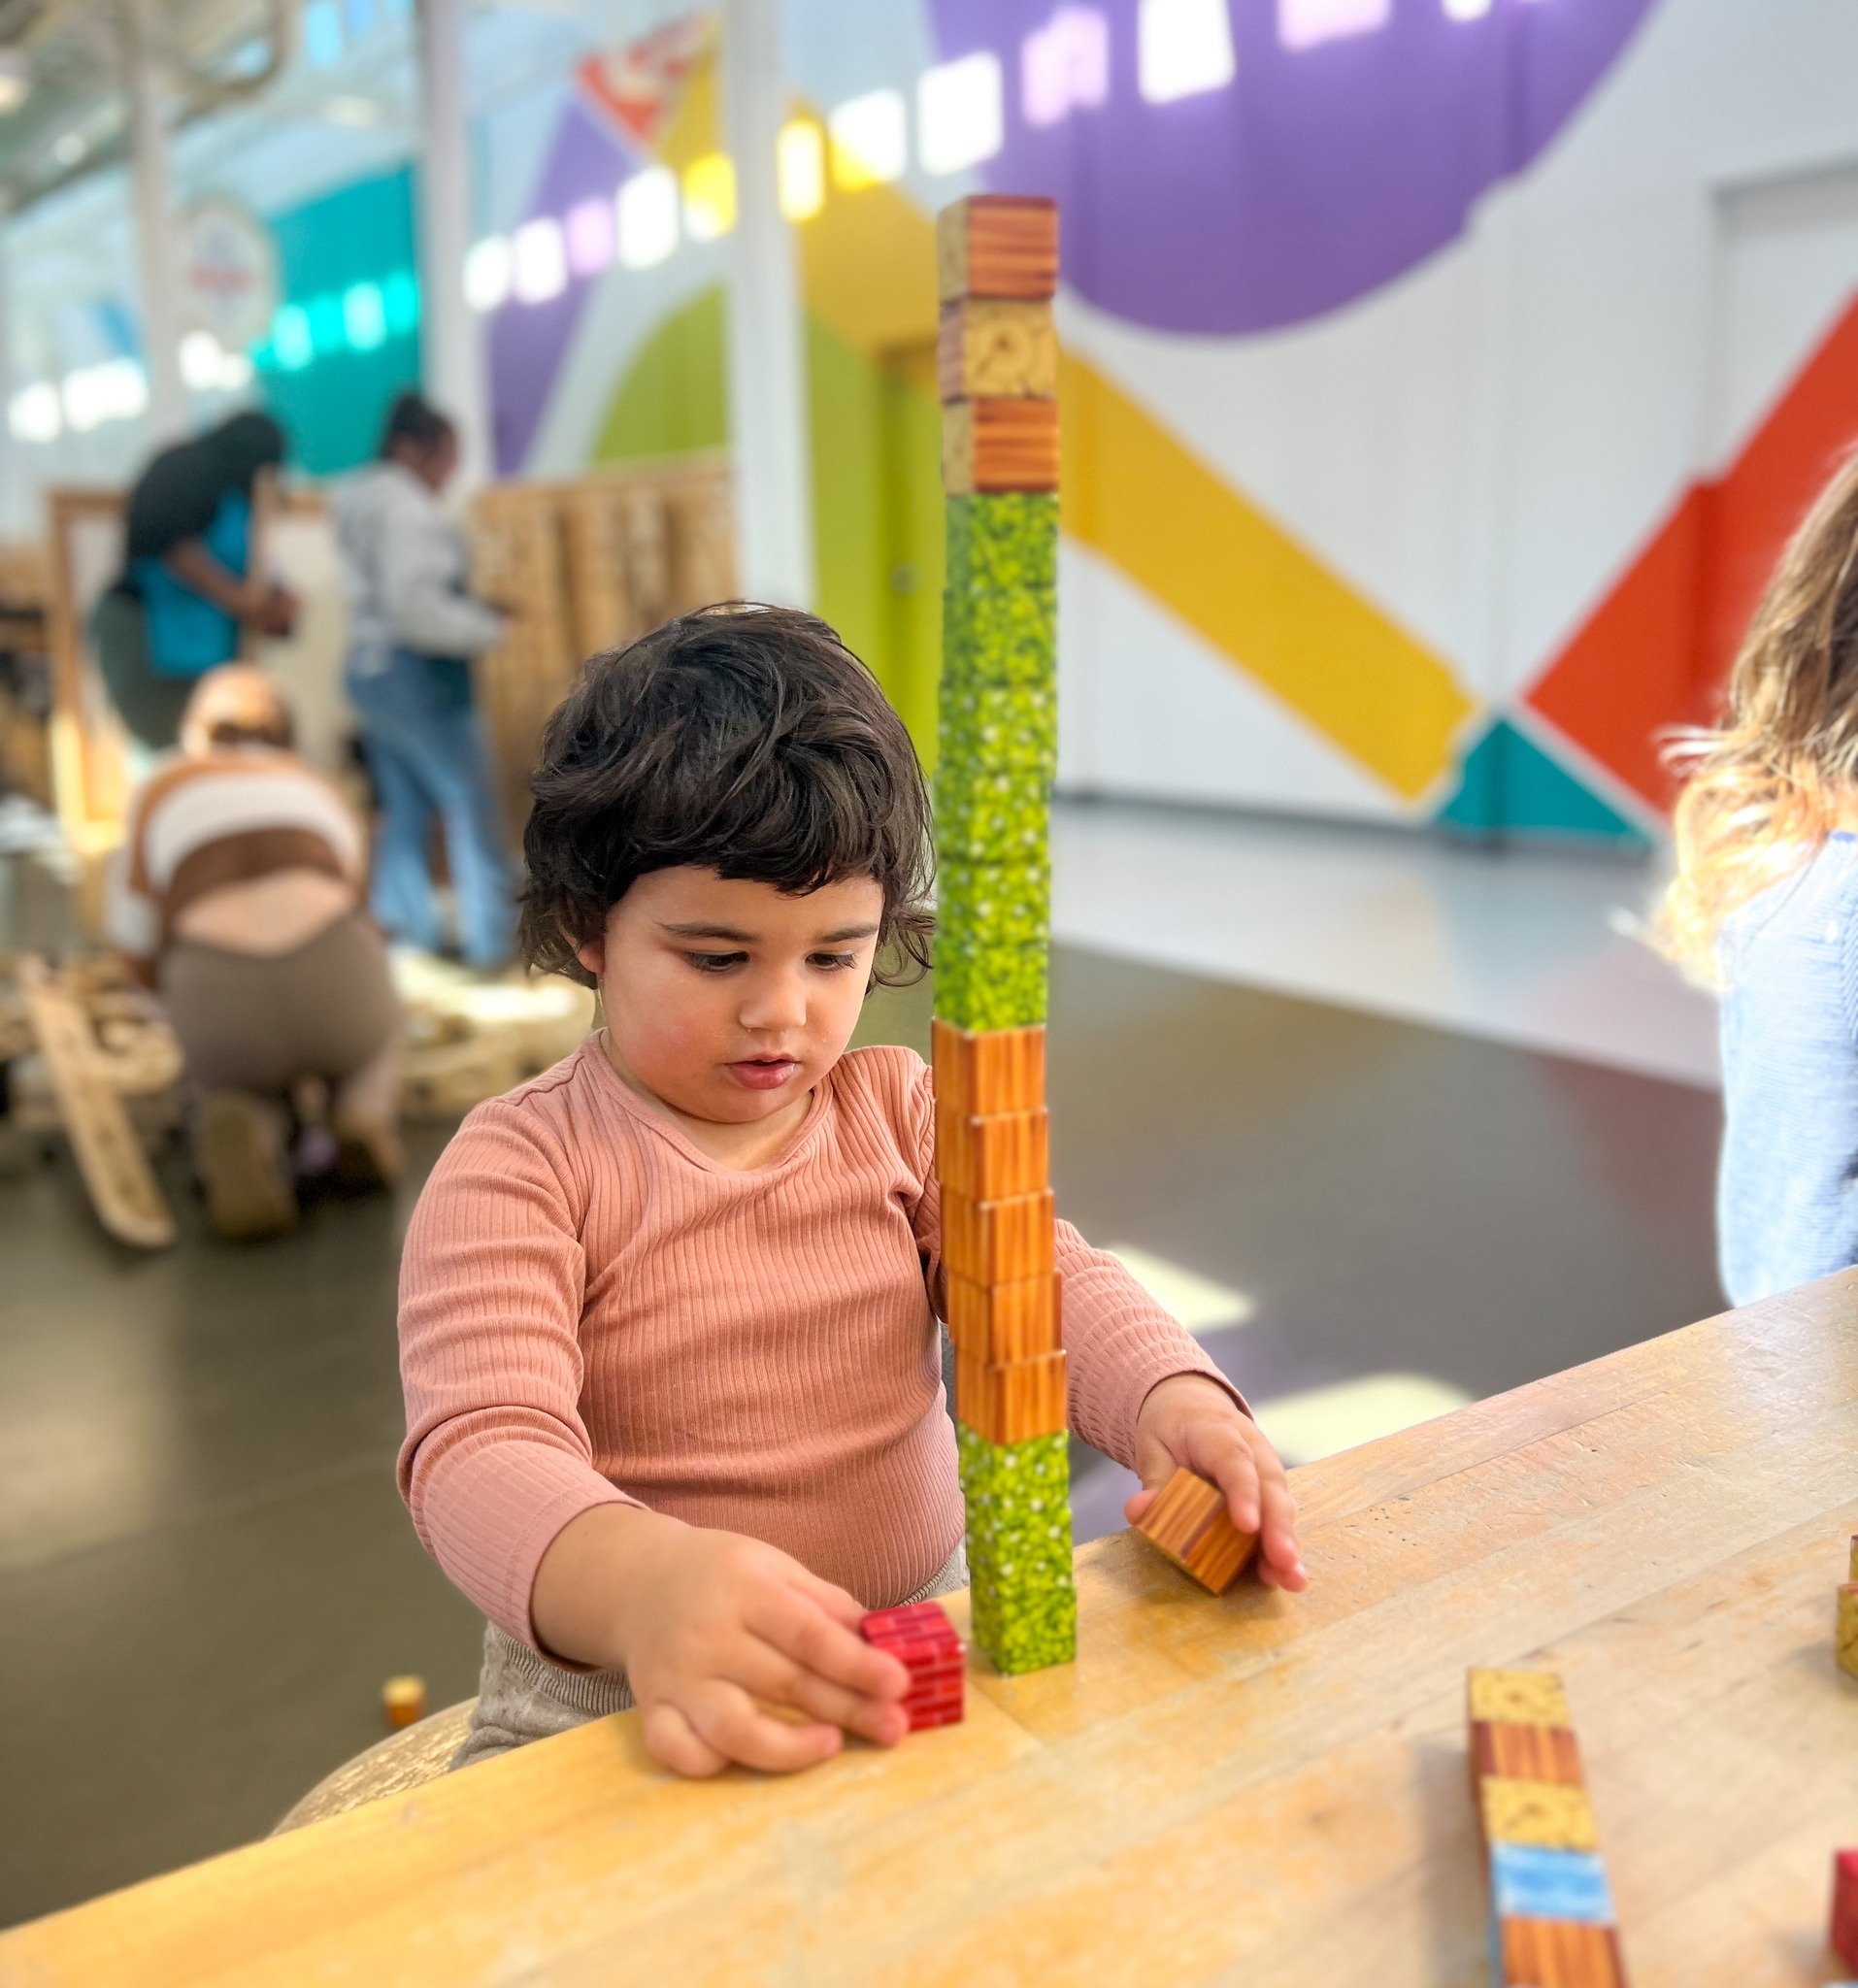 🏗️The focus and determination of our little engineers is incredible! 
.
.
Can you make your tower taller? 
#discoverwcm
#WestchesterChildrensMuseum
#WestchesterFamily
#WestchesterKids
#StemEducation
#PlayToLearn
#ImaginationIsKey
#UseYourImagination